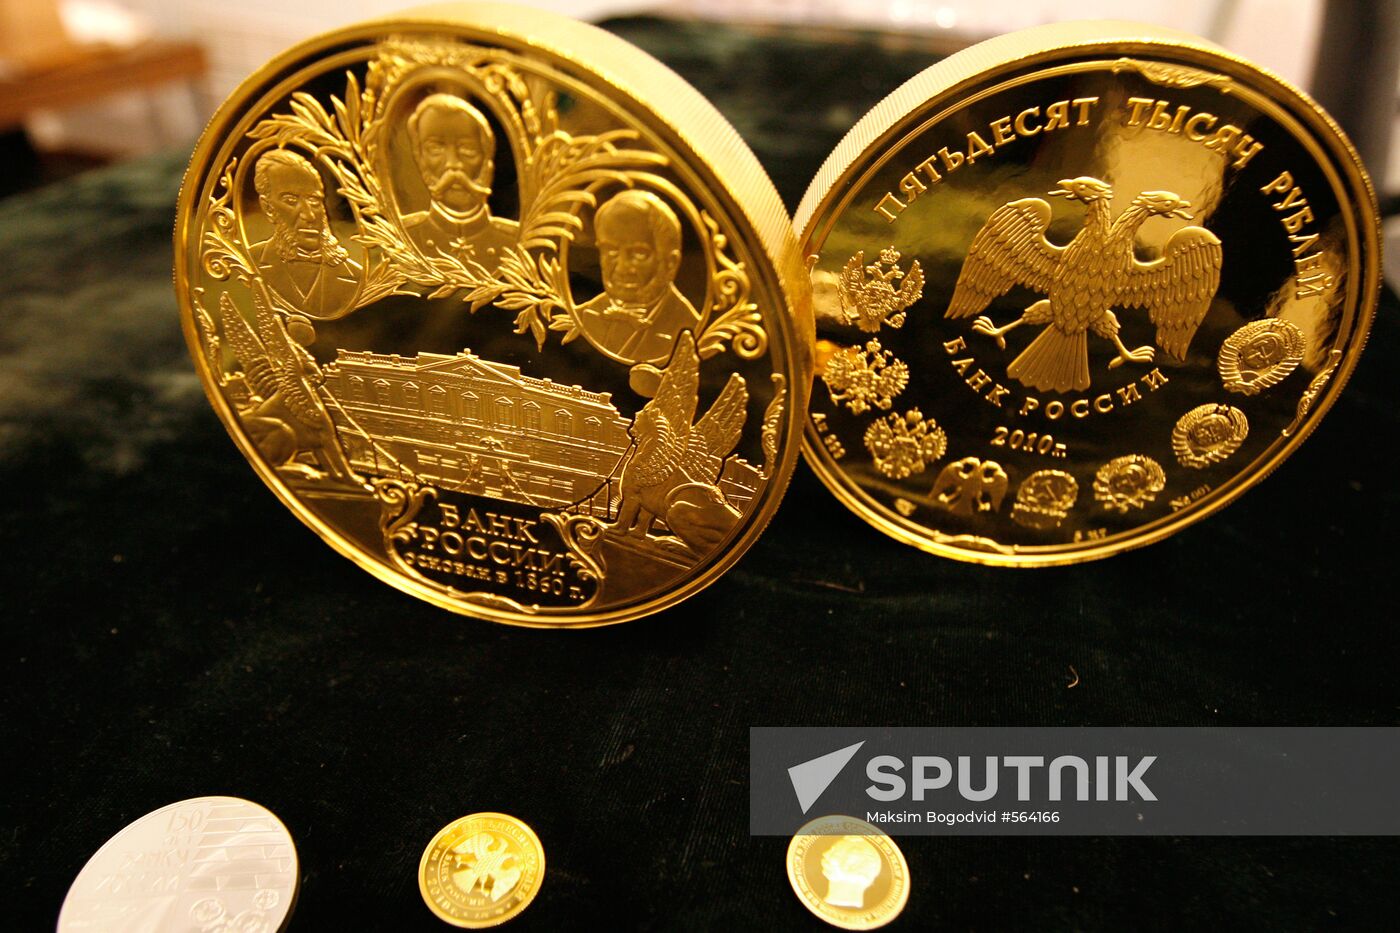 Gold coin bearing a 50,000 ruble face value